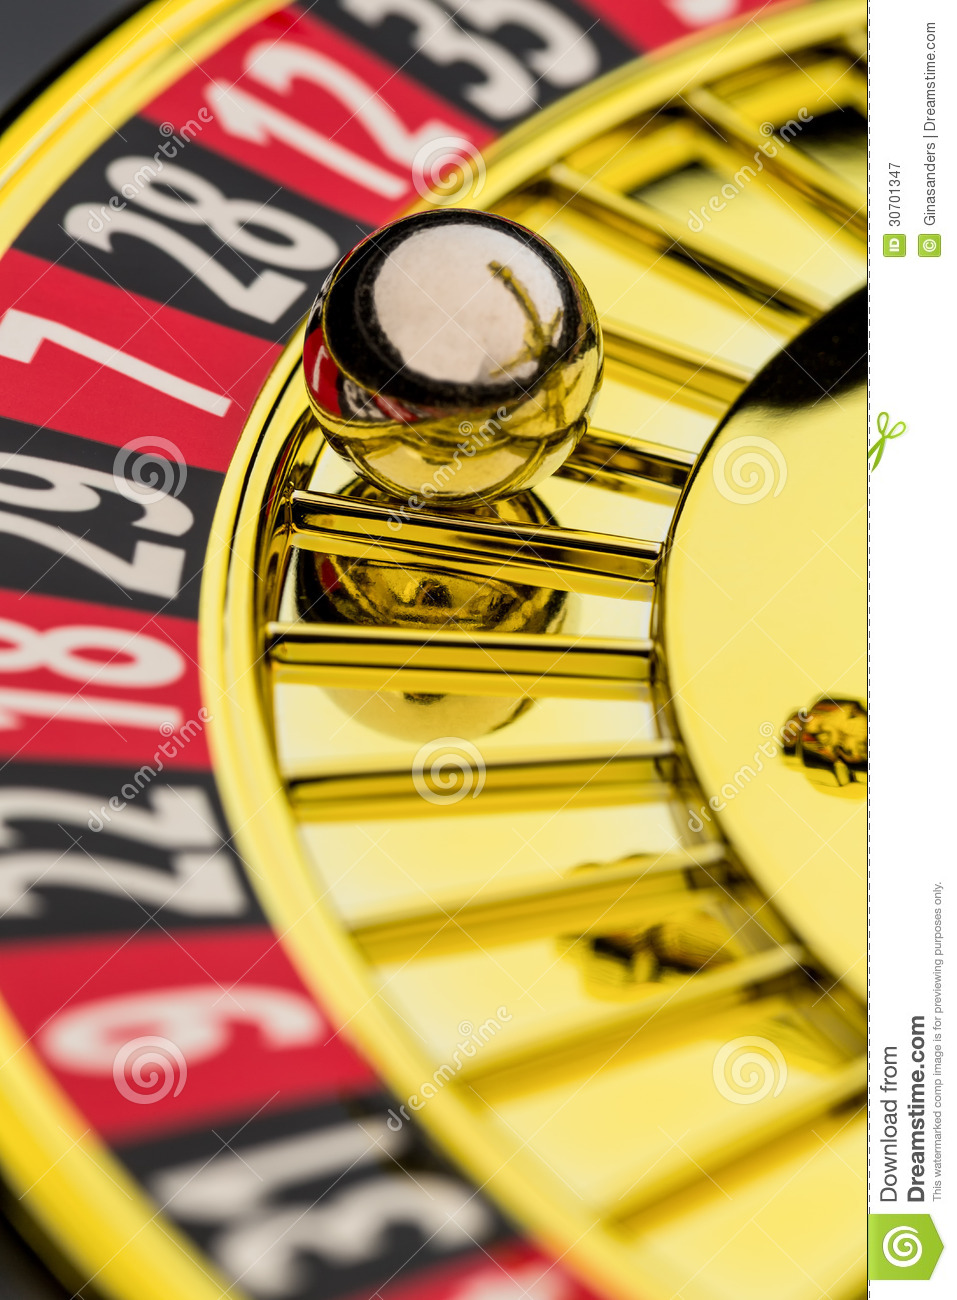 Roulette Gambling In A Casino  Winning Or Losing Is Decided By Chance